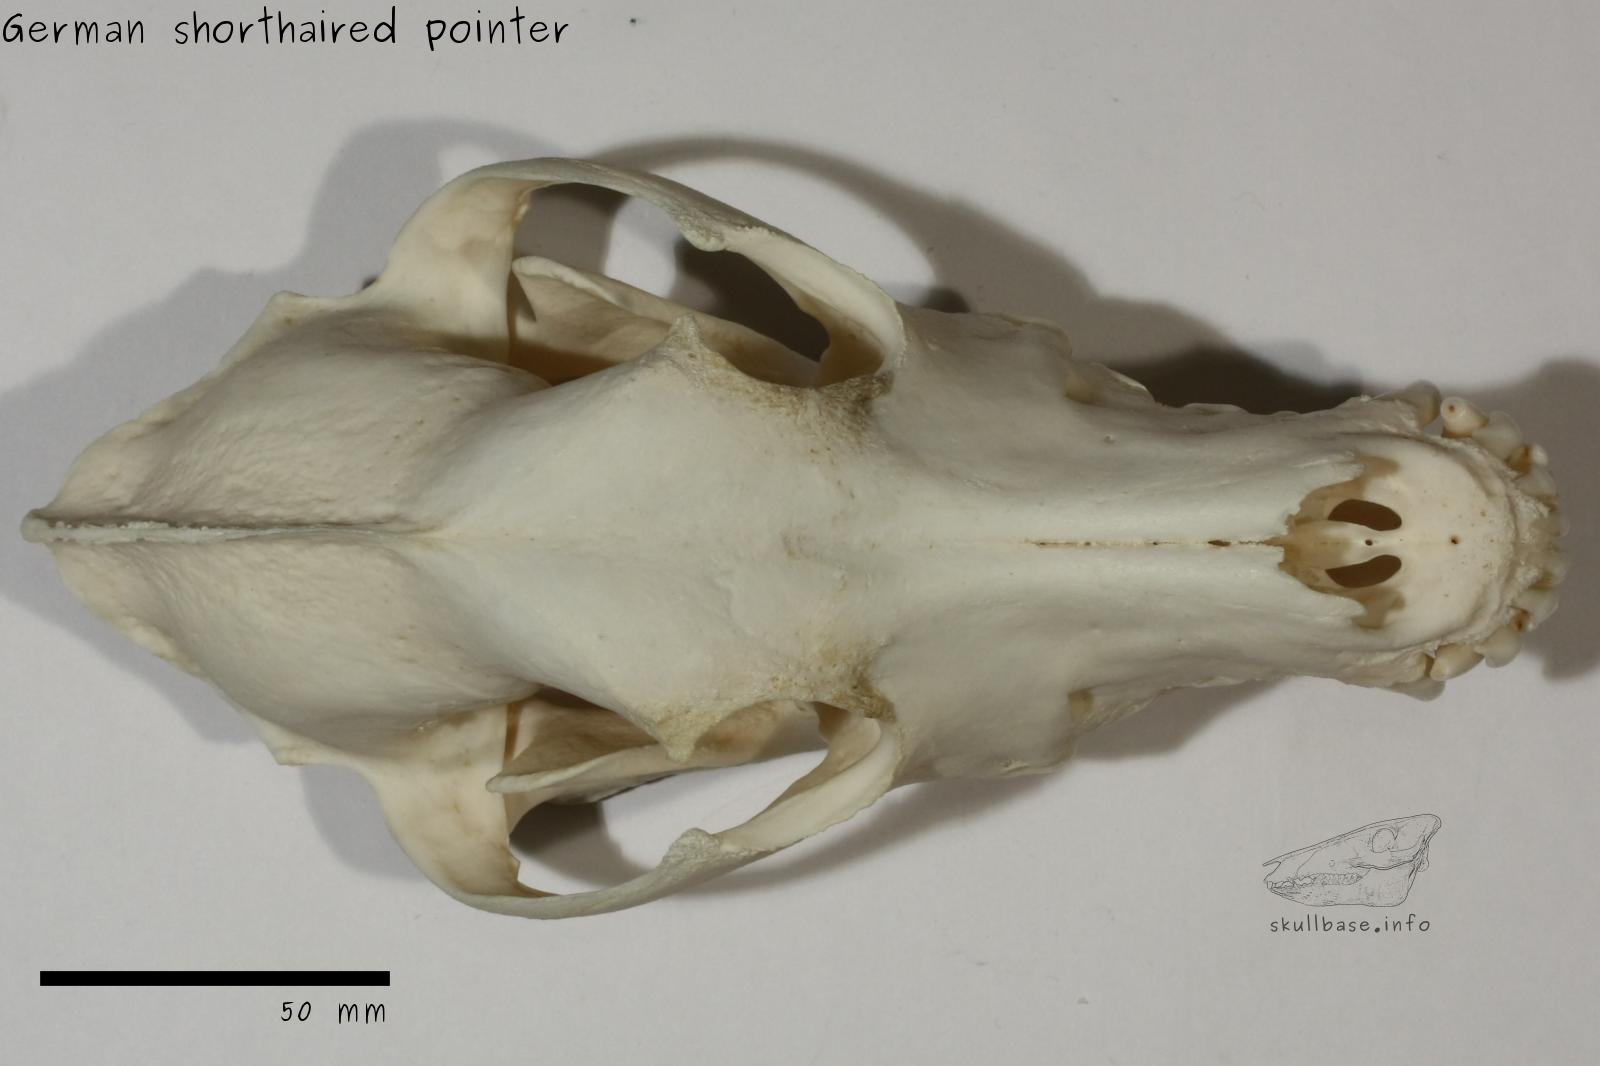 German shorthaired pointer (Canis lupus familiaris) skull dorsal view